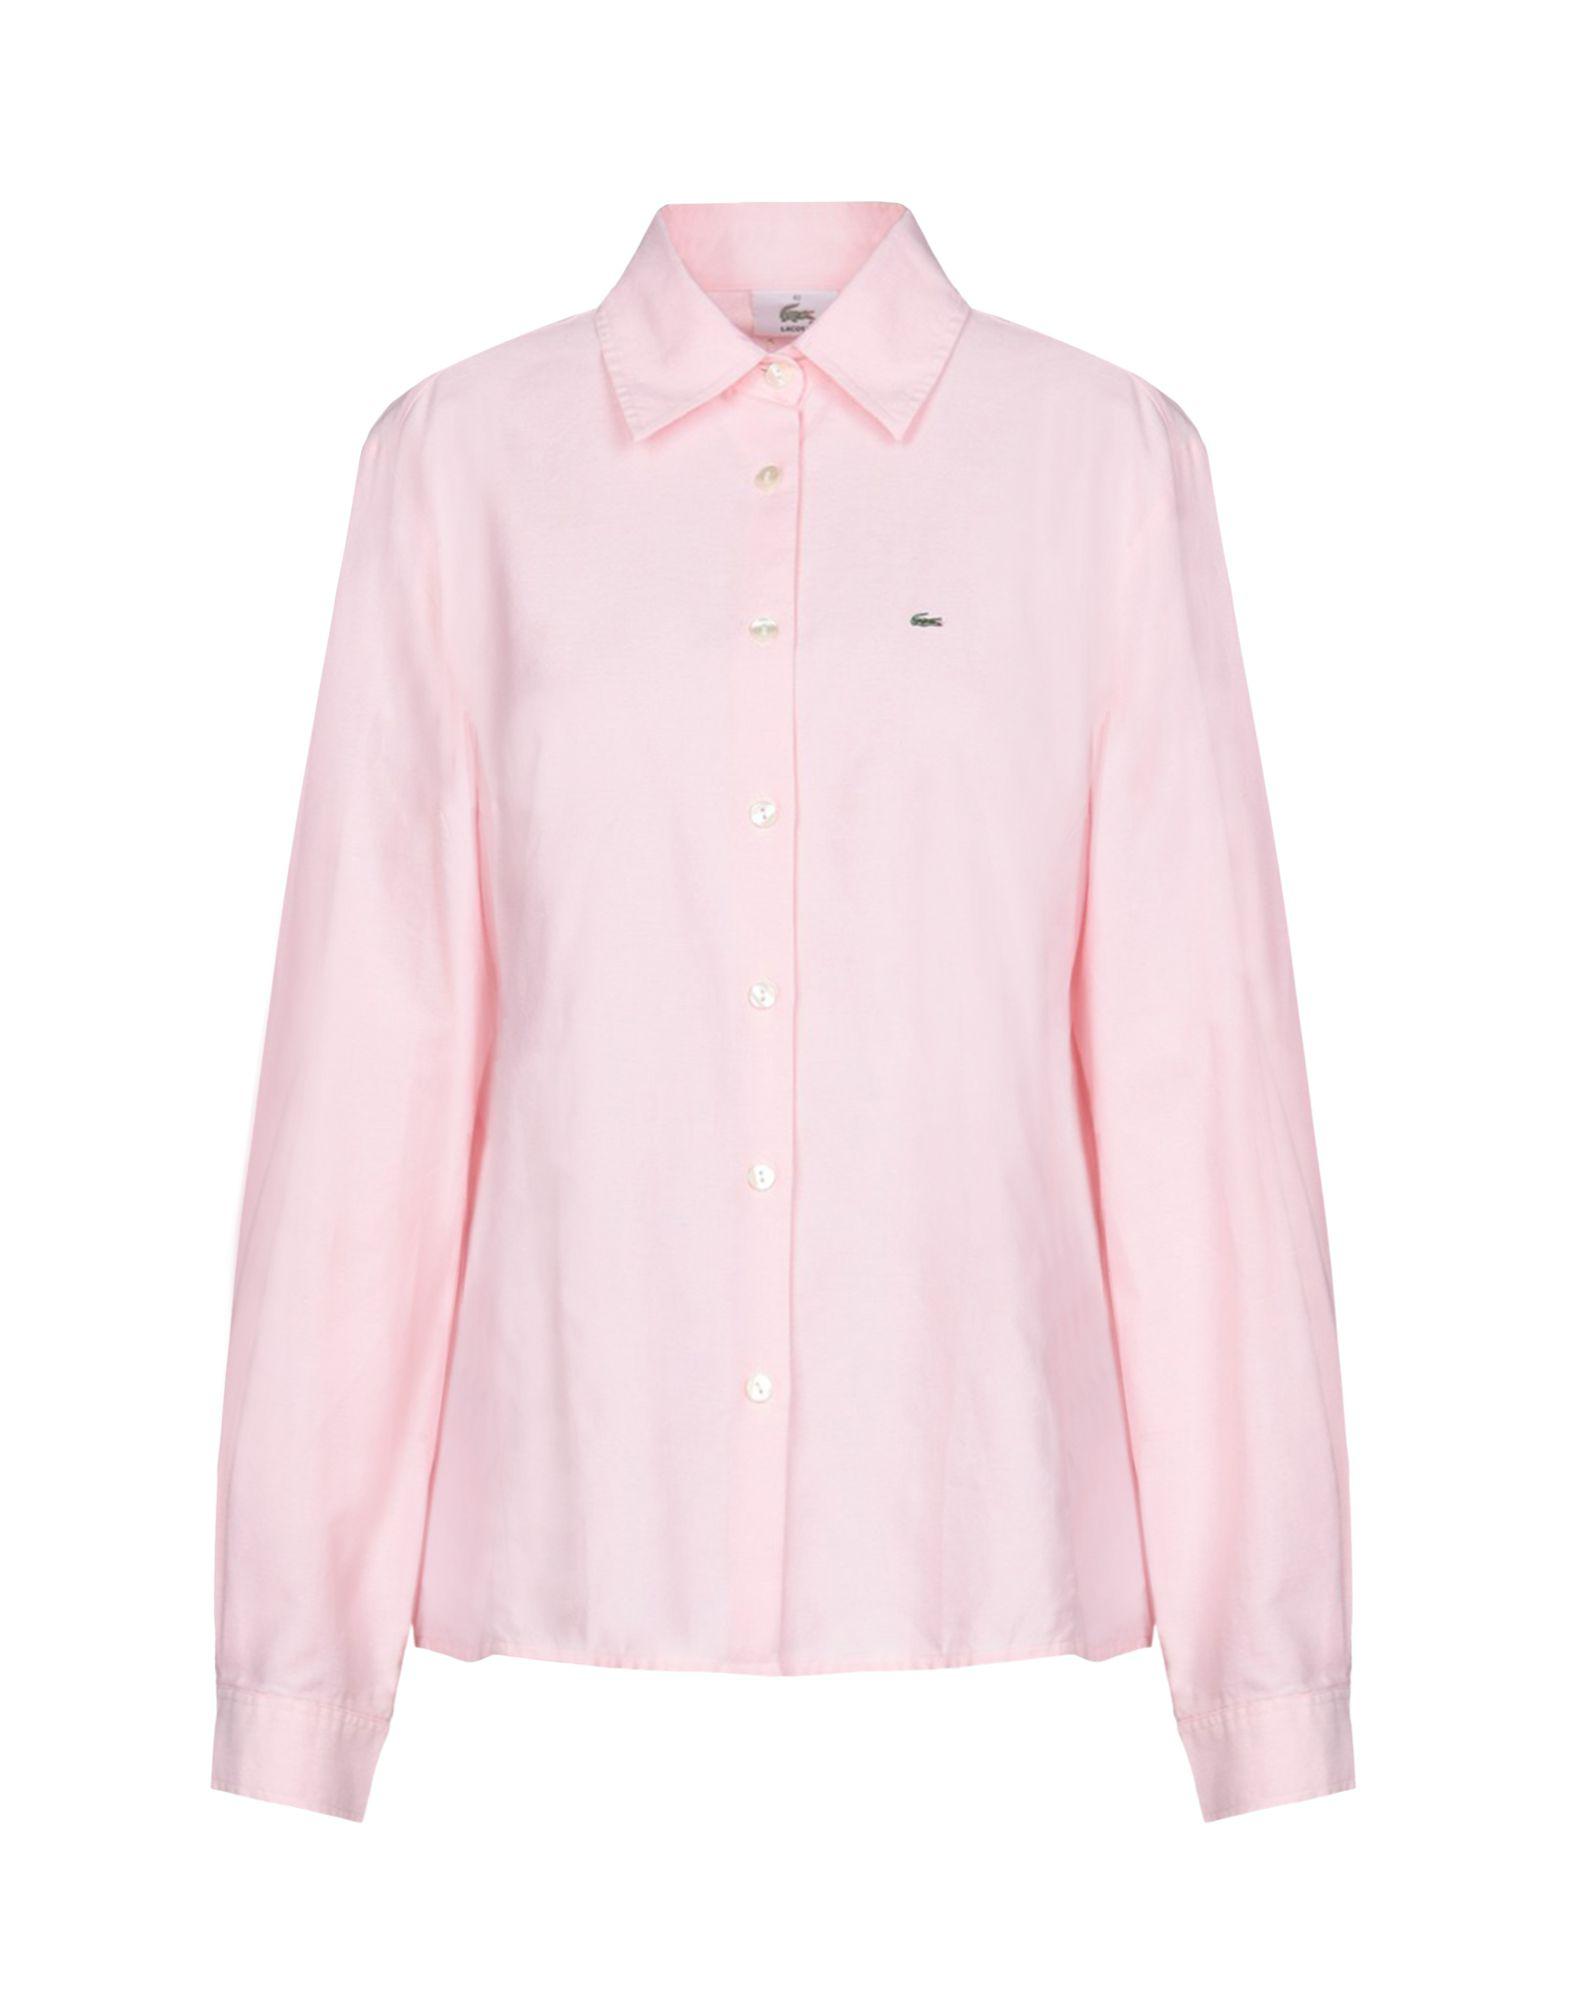 Lacoste Cotton Shirt in Light Pink (Pink) - Lyst